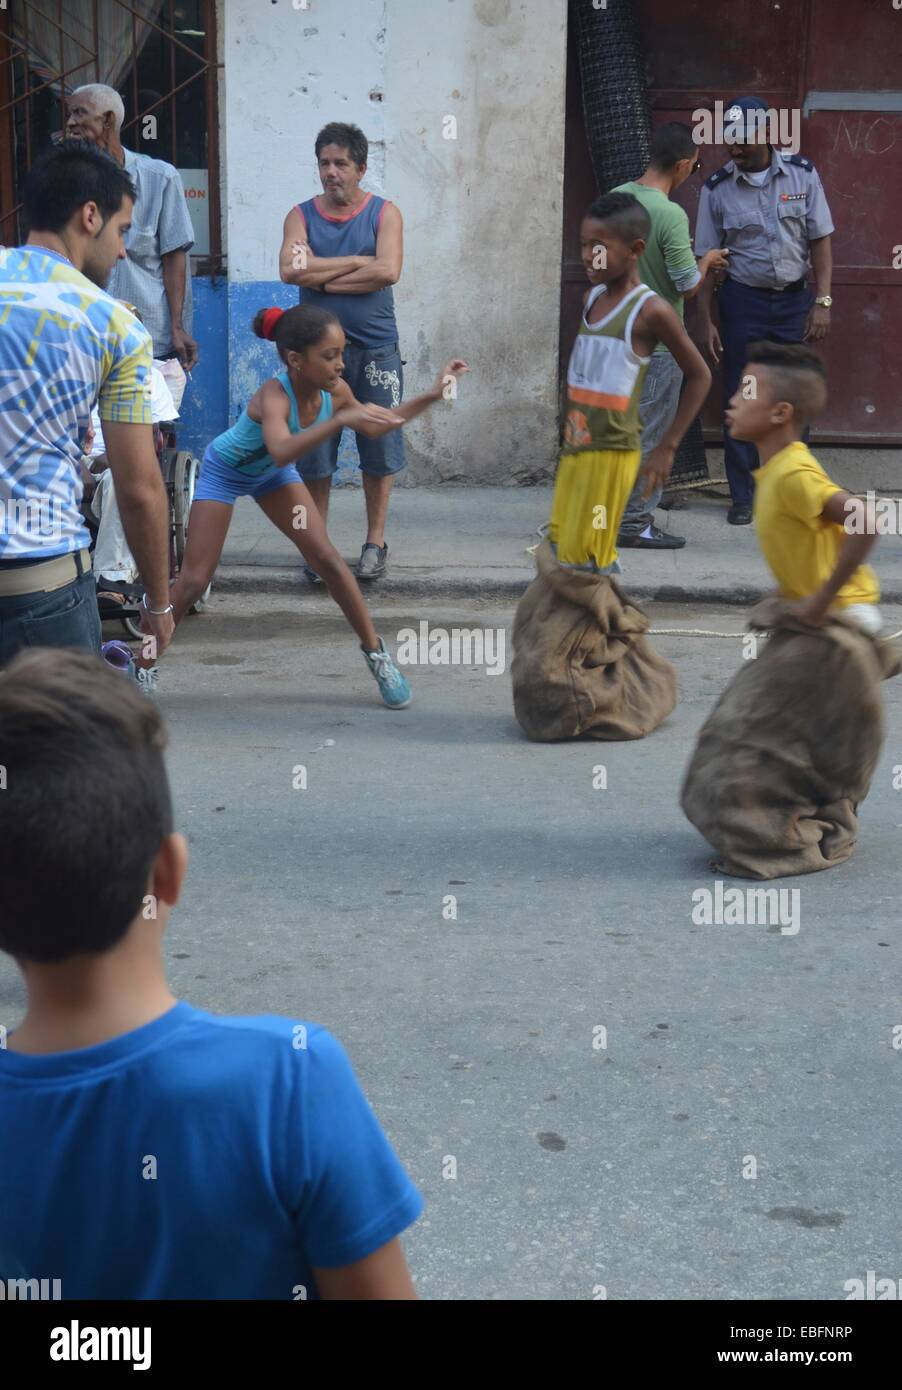 Children participate in a school sports day, on the streets of Centro Habana, Havana, Cuba Stock Photo